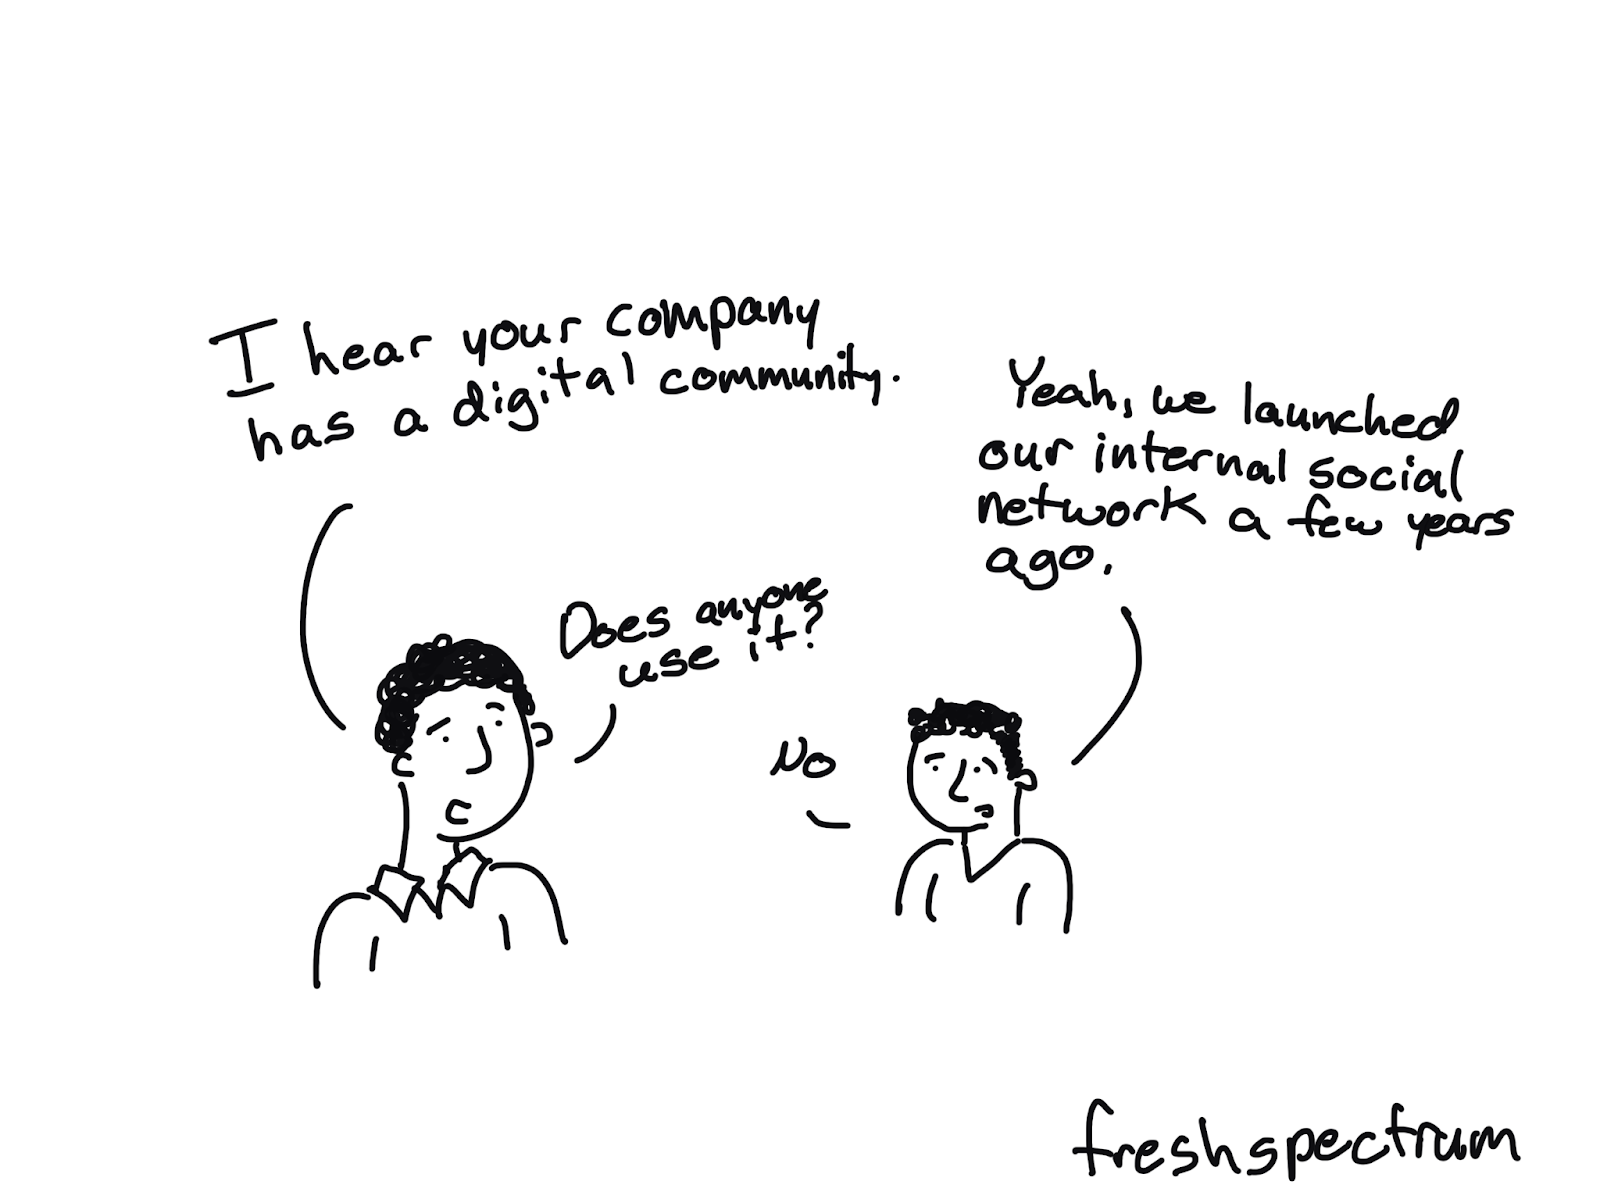 Cartoon illustration of two people where one is saying "I hear your company has a digital community" and the other is saying :Yeah, we launched out internal social network a few years ago." The first person asks "Does anyone use it?" and the second responds "no."